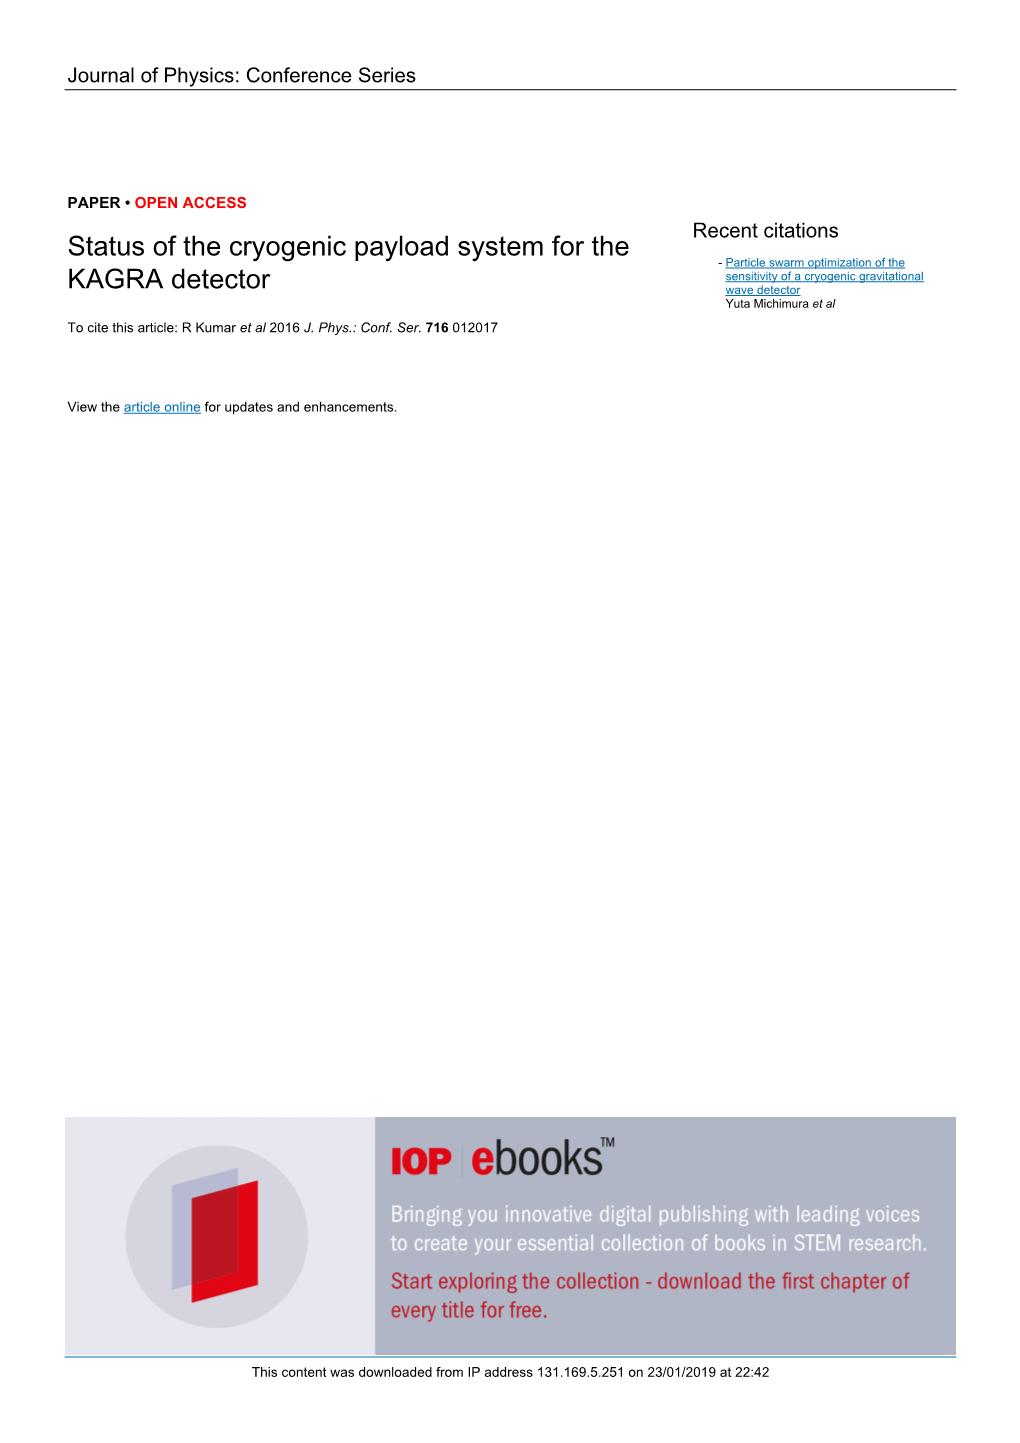 Status of the Cryogenic Payload System for the KAGRA Detector